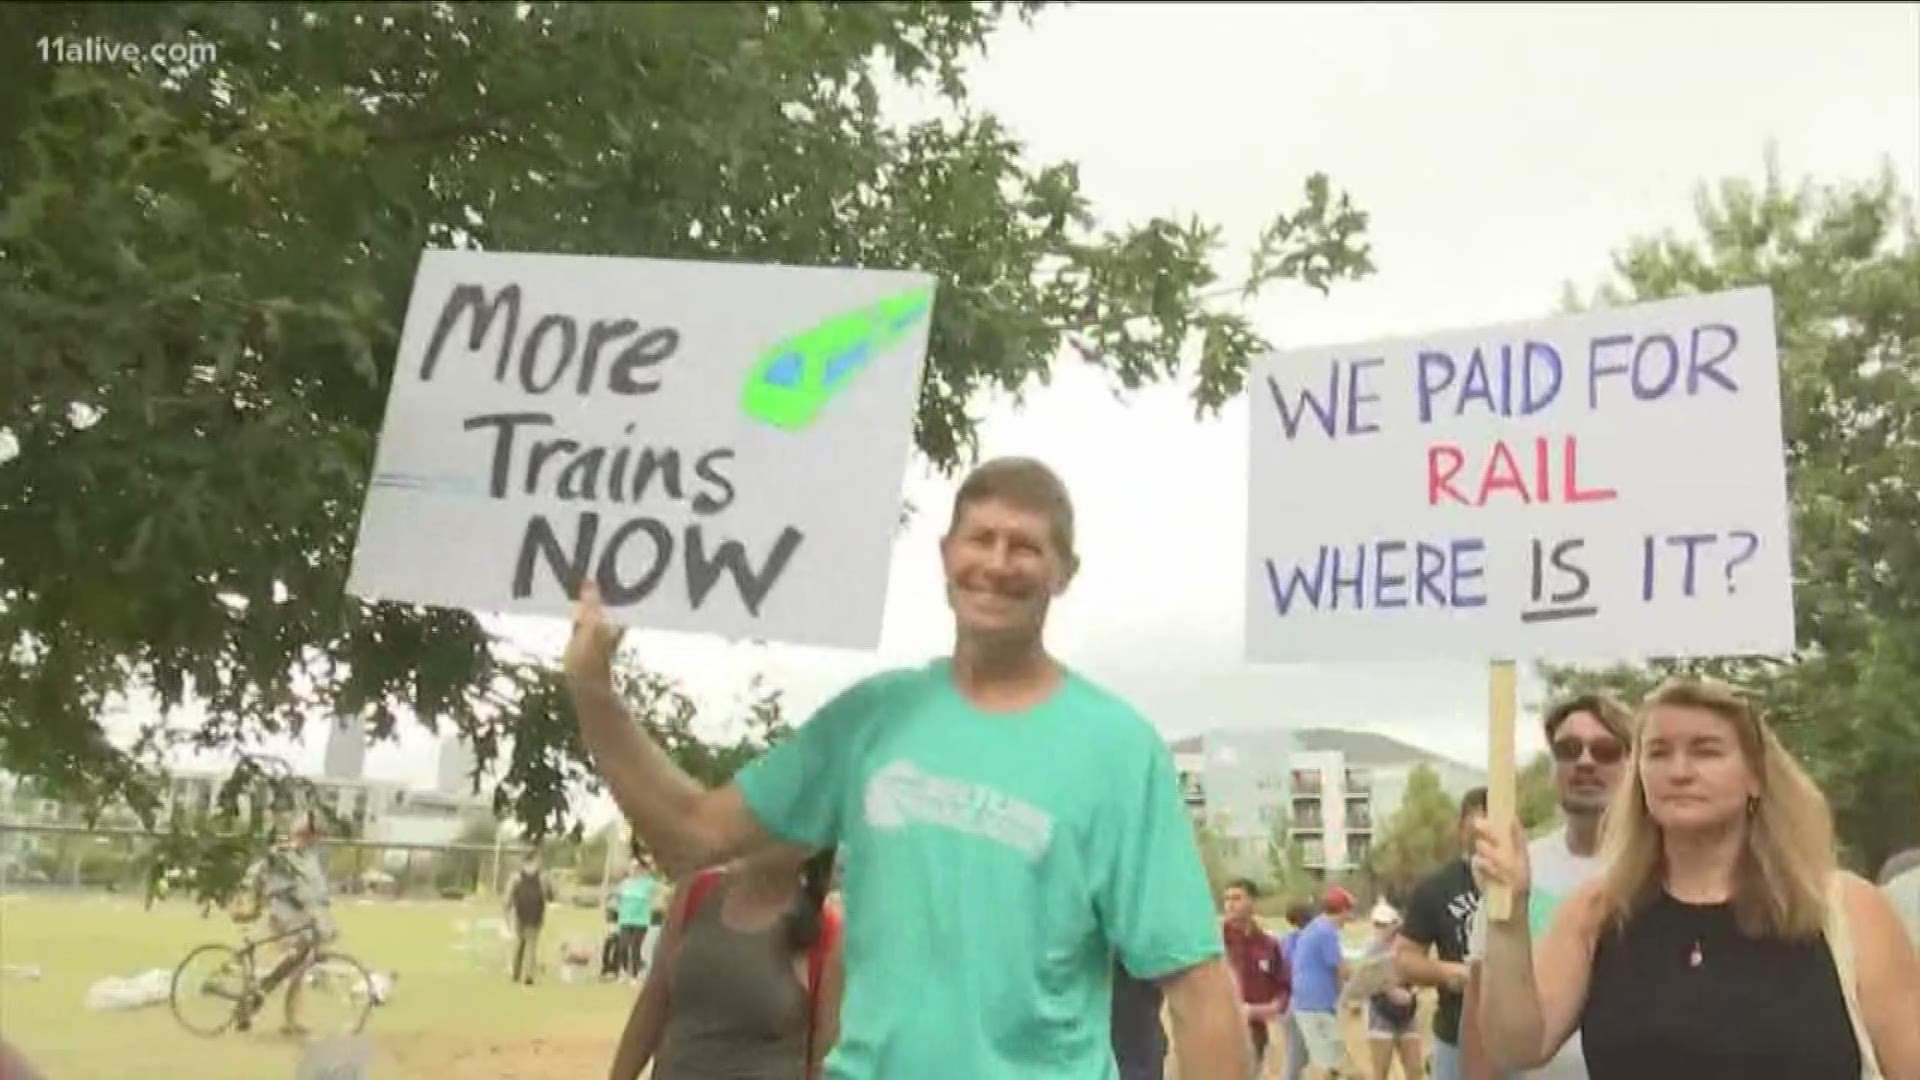 The group says a BeltLine train has been promised to ease traffic but they say the city has never made it happen.